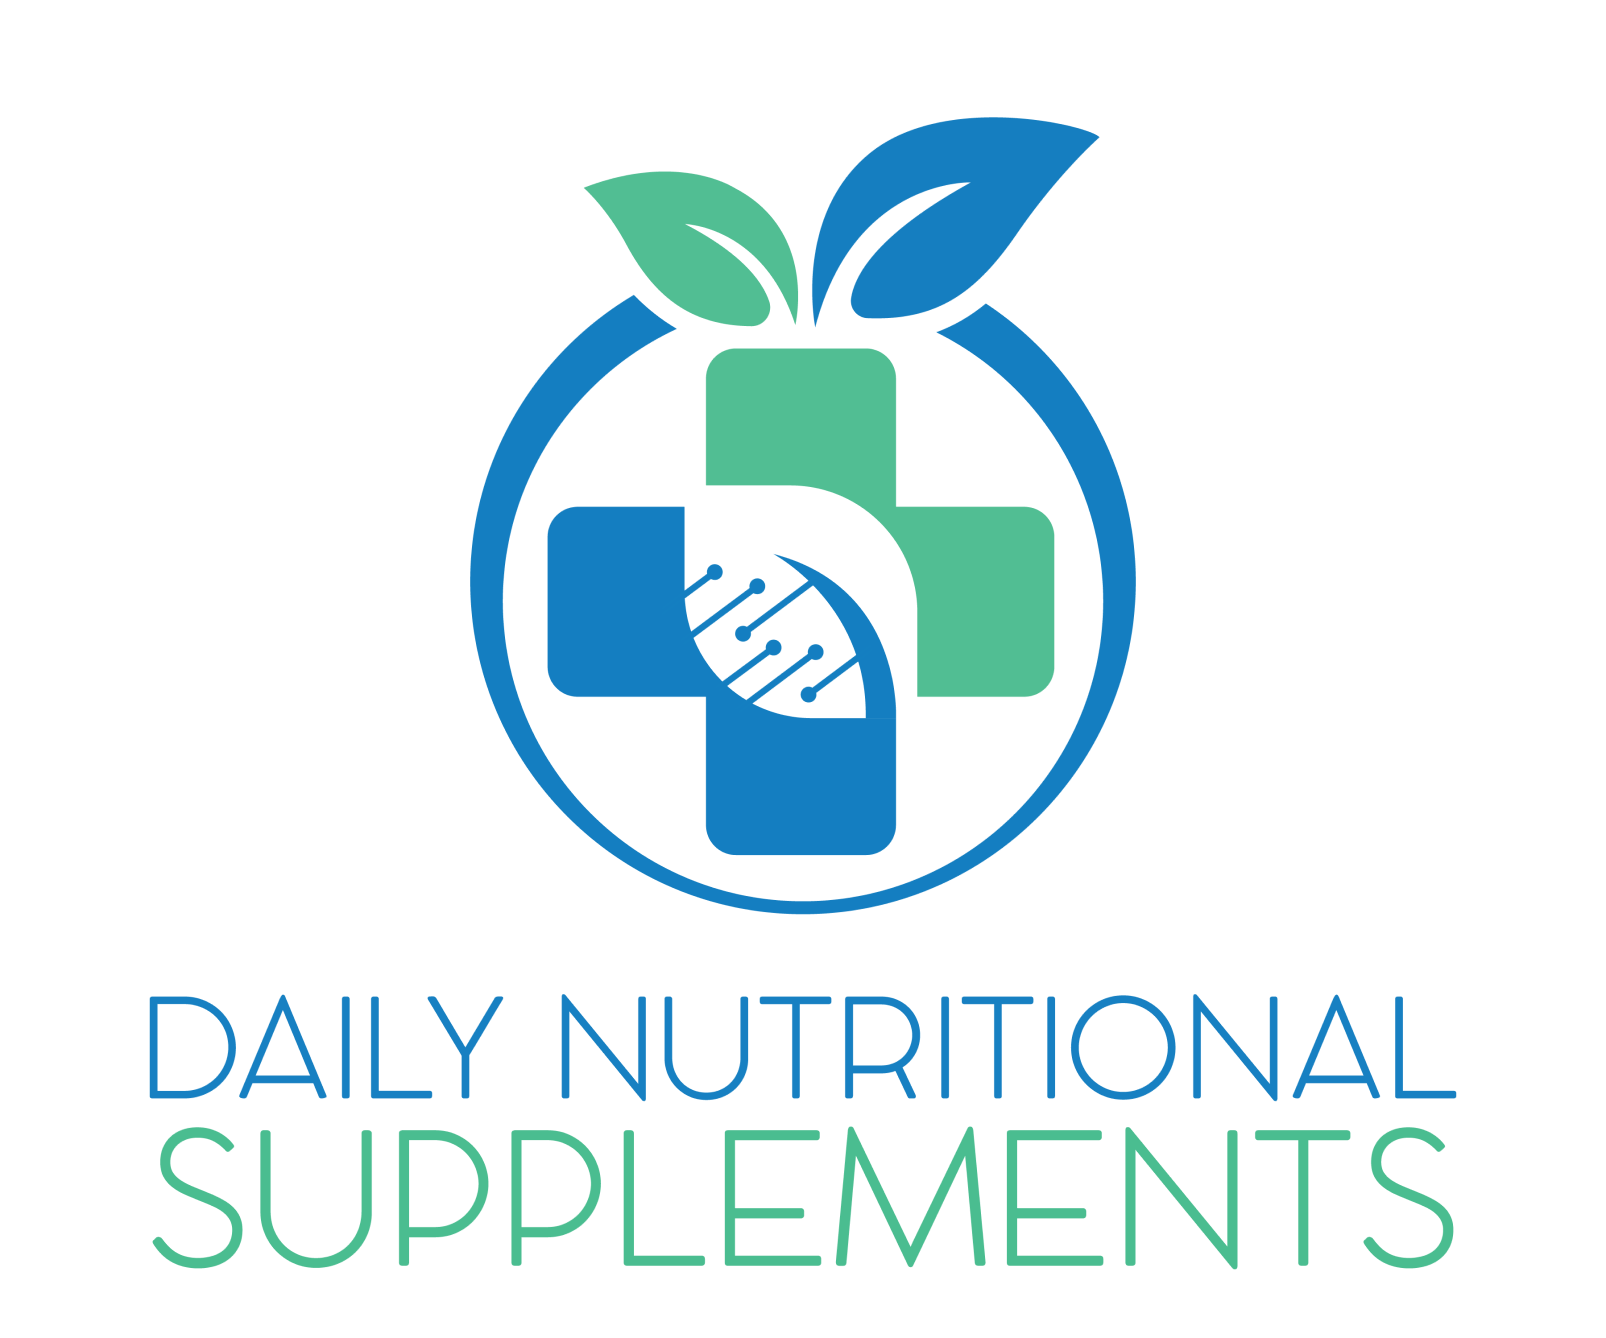 Daily Nutritional Supplements